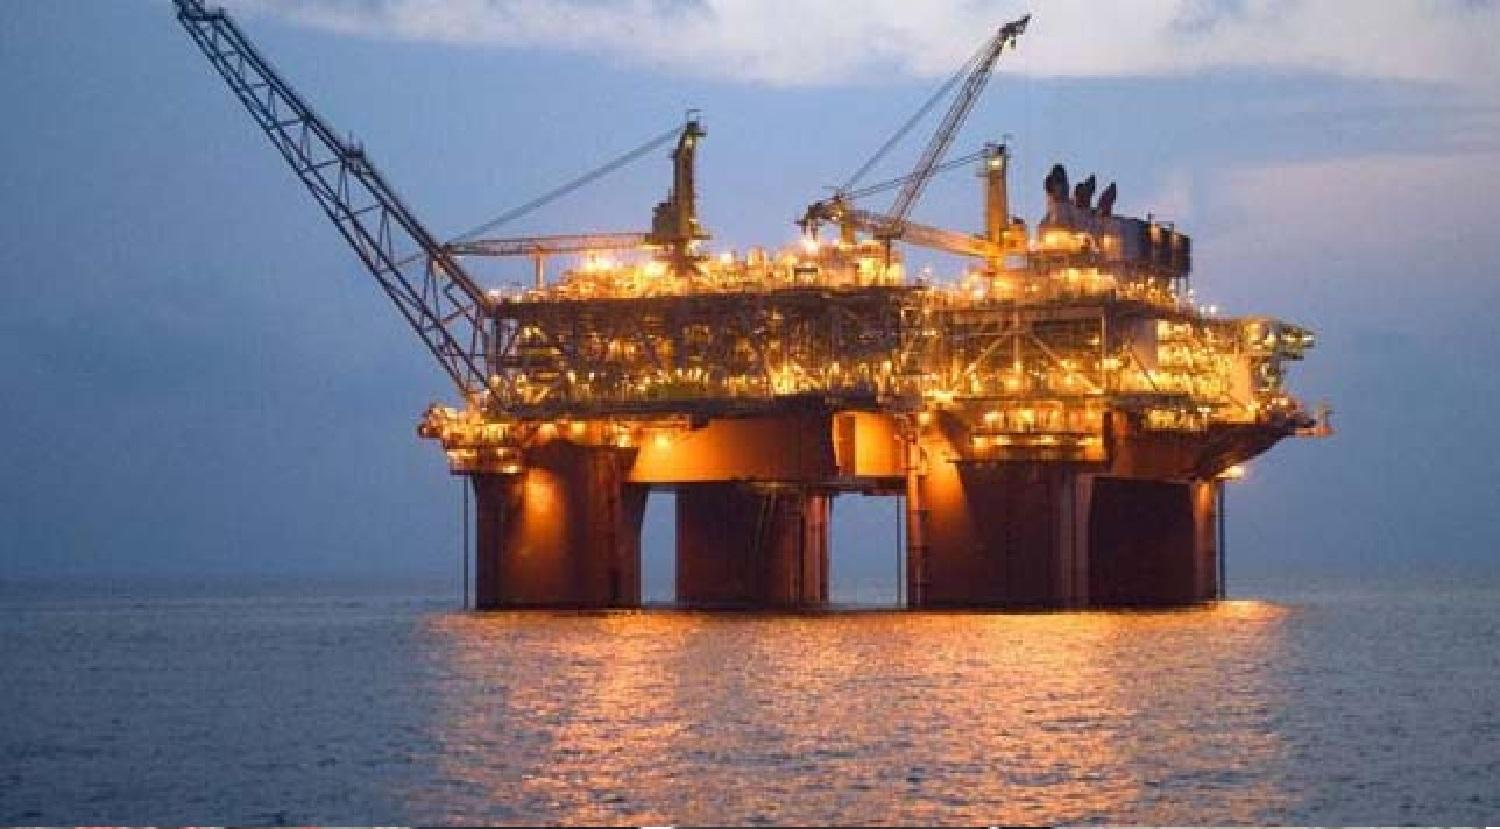 Nigerian News Update: FG plans 100% growth in crude oil output